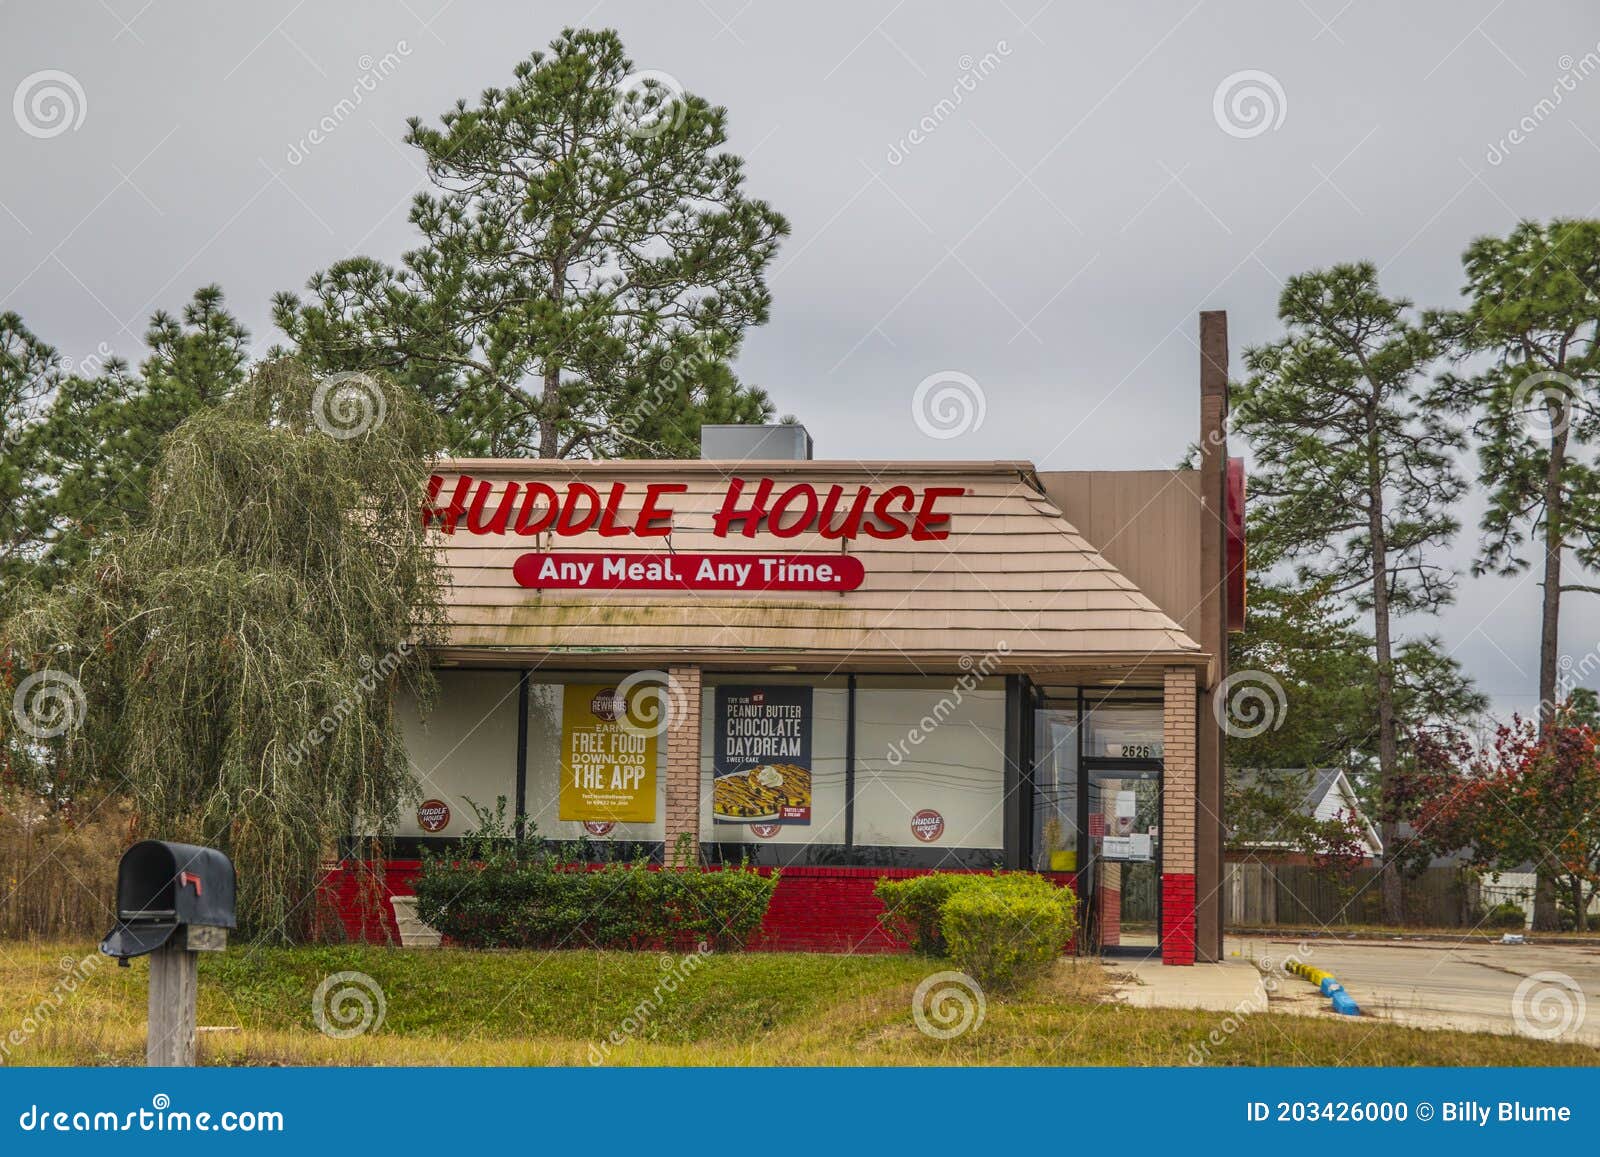 5 390 Restaurant Front House Photos Free Royalty Free Stock Photos From Dreamstime